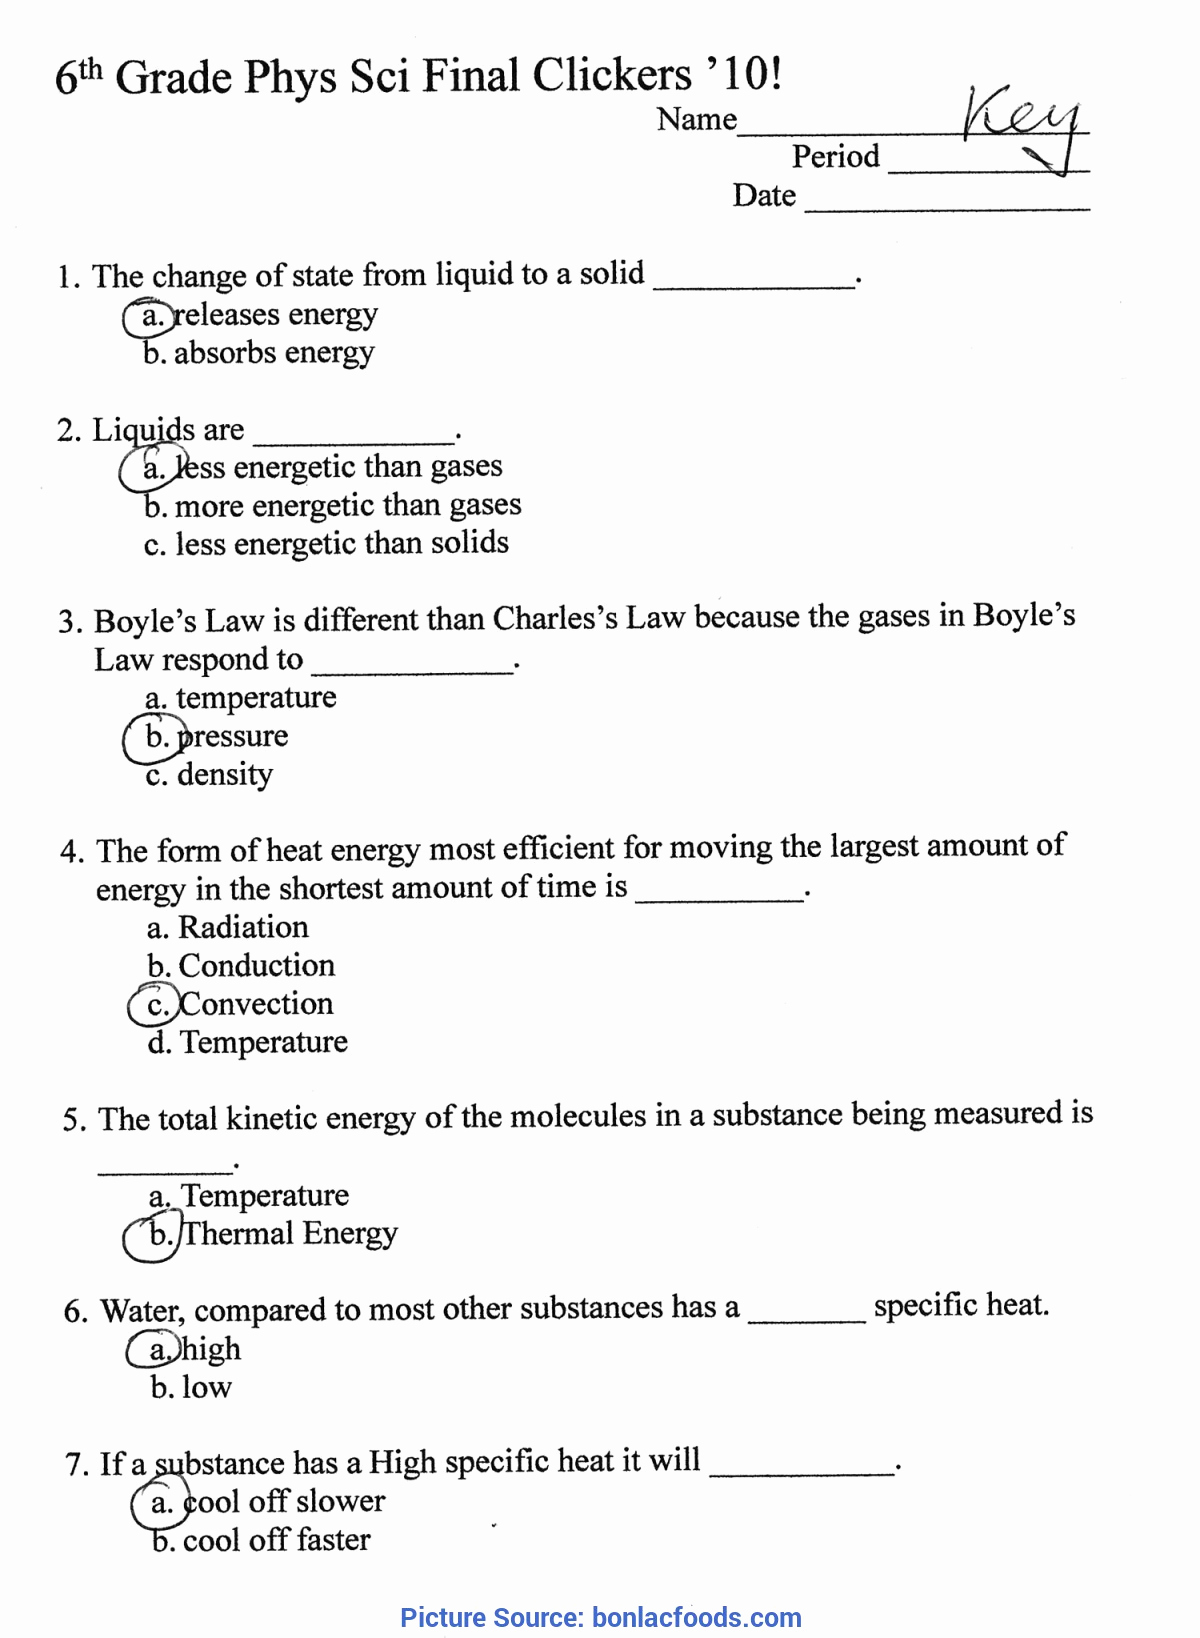 Free 6th Grade Science Worksheets Luxury Briliant 6th Grade Science Lessons Free Worksheets for All